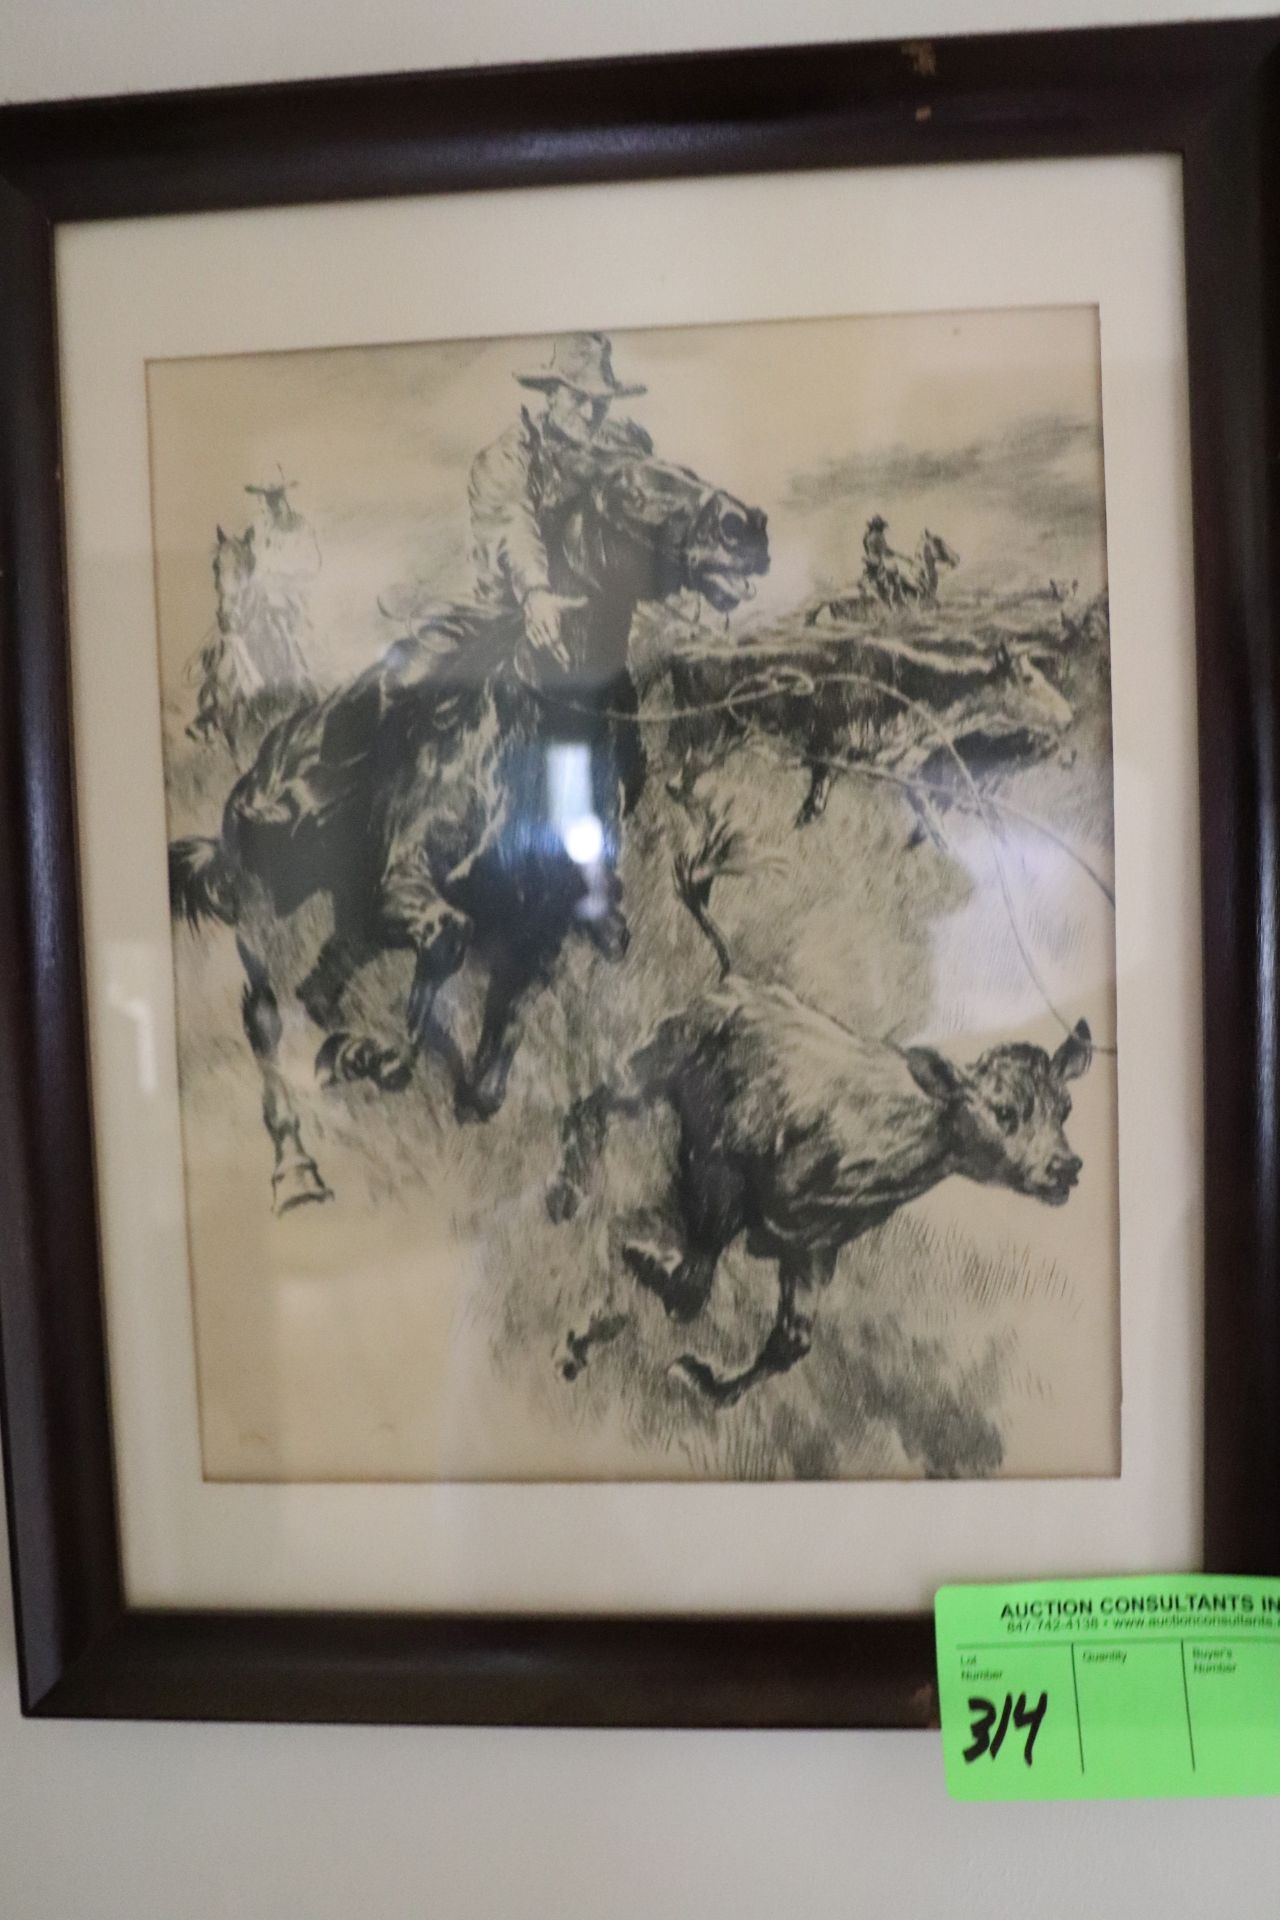 Three framed prints: one depicting cowboy scene, one depicting Pumbaa's hunting, and ship on ocean s